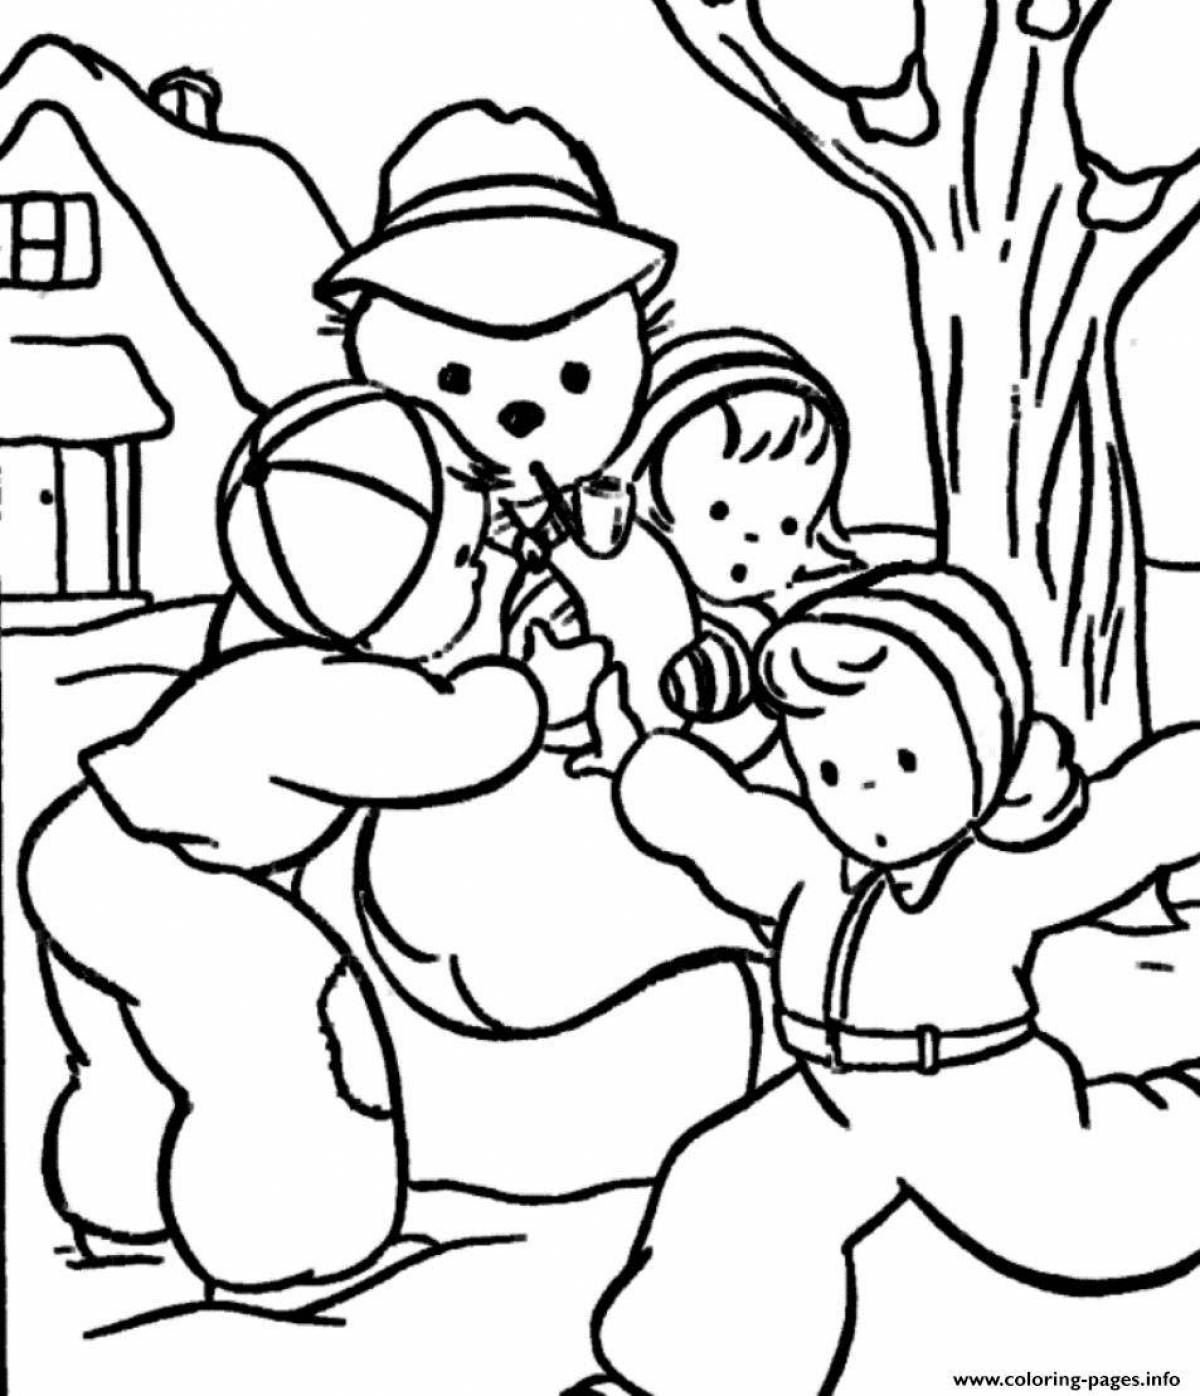 Fun coloring book winter holidays for kids